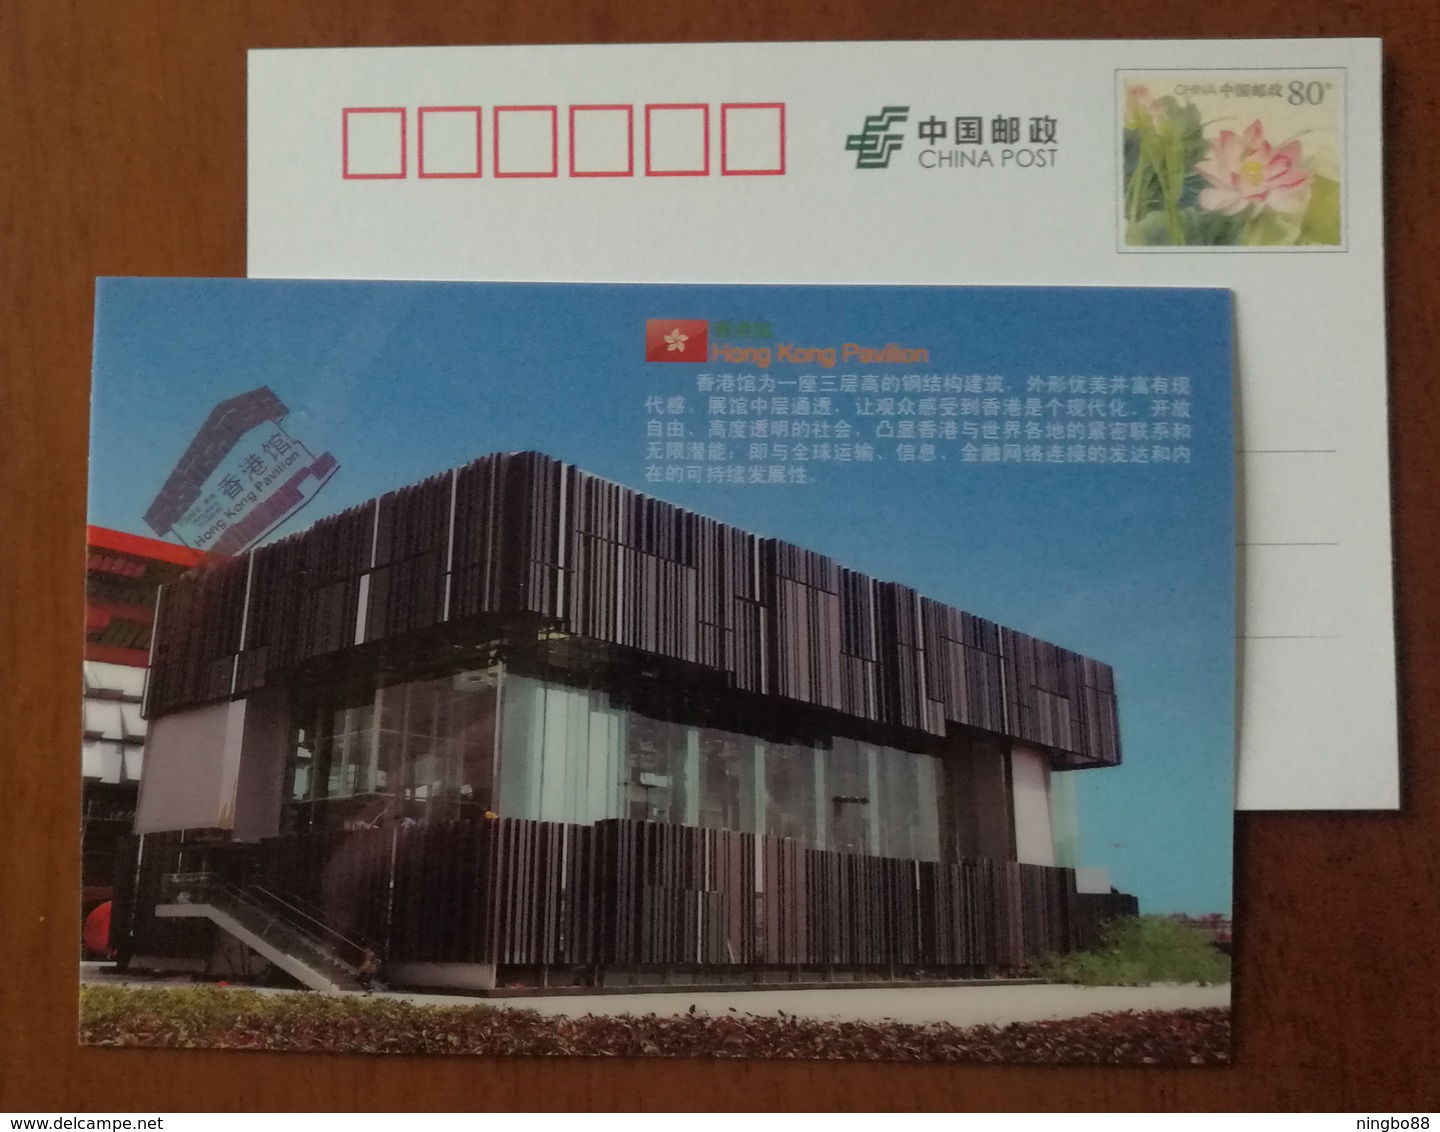 Hong Kong Pavilion Architecture,China 2010 Expo 2010 Shanghai World Exposition Advertising Pre-stamped Card - 2010 – Shanghai (China)